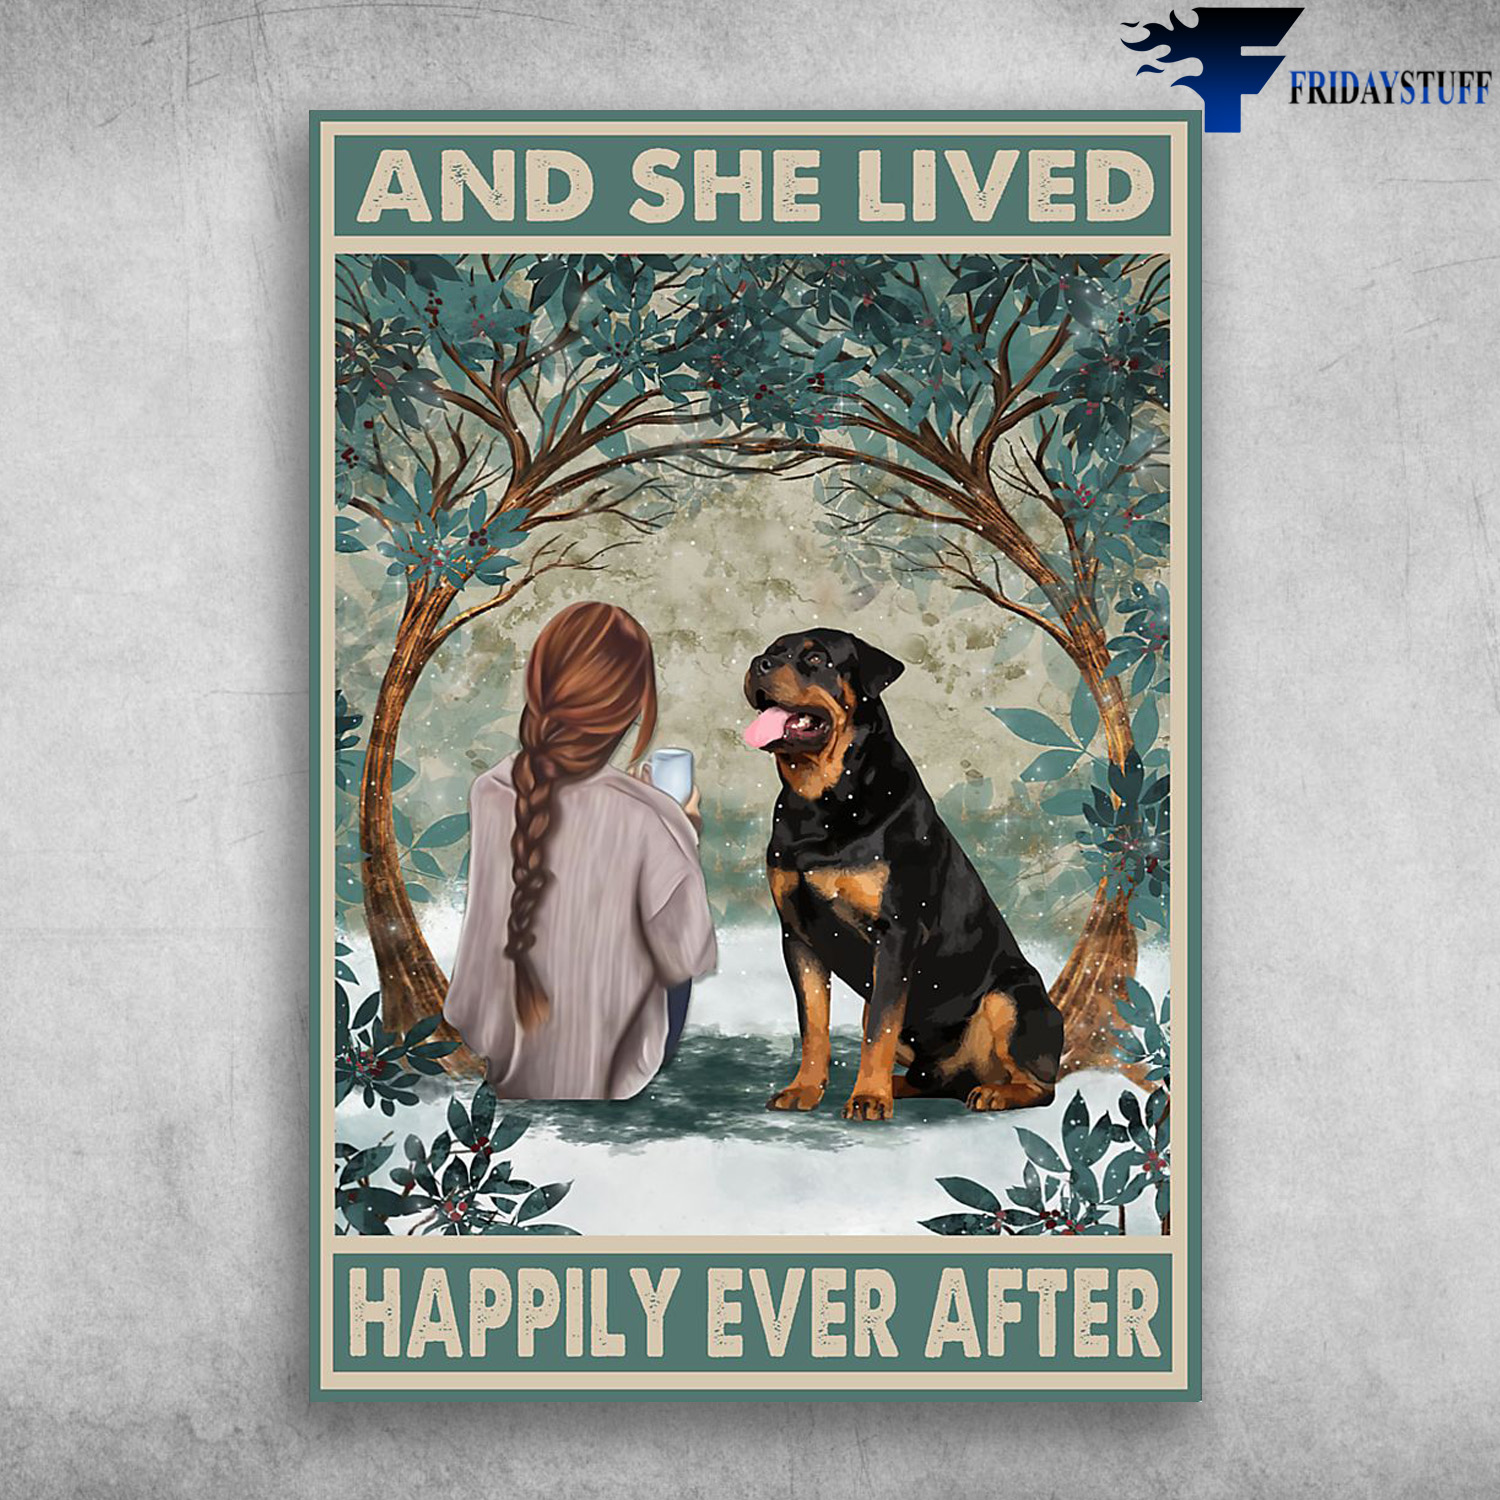 Girl And Rottweiler Dog - And She Live, Happily Ever After